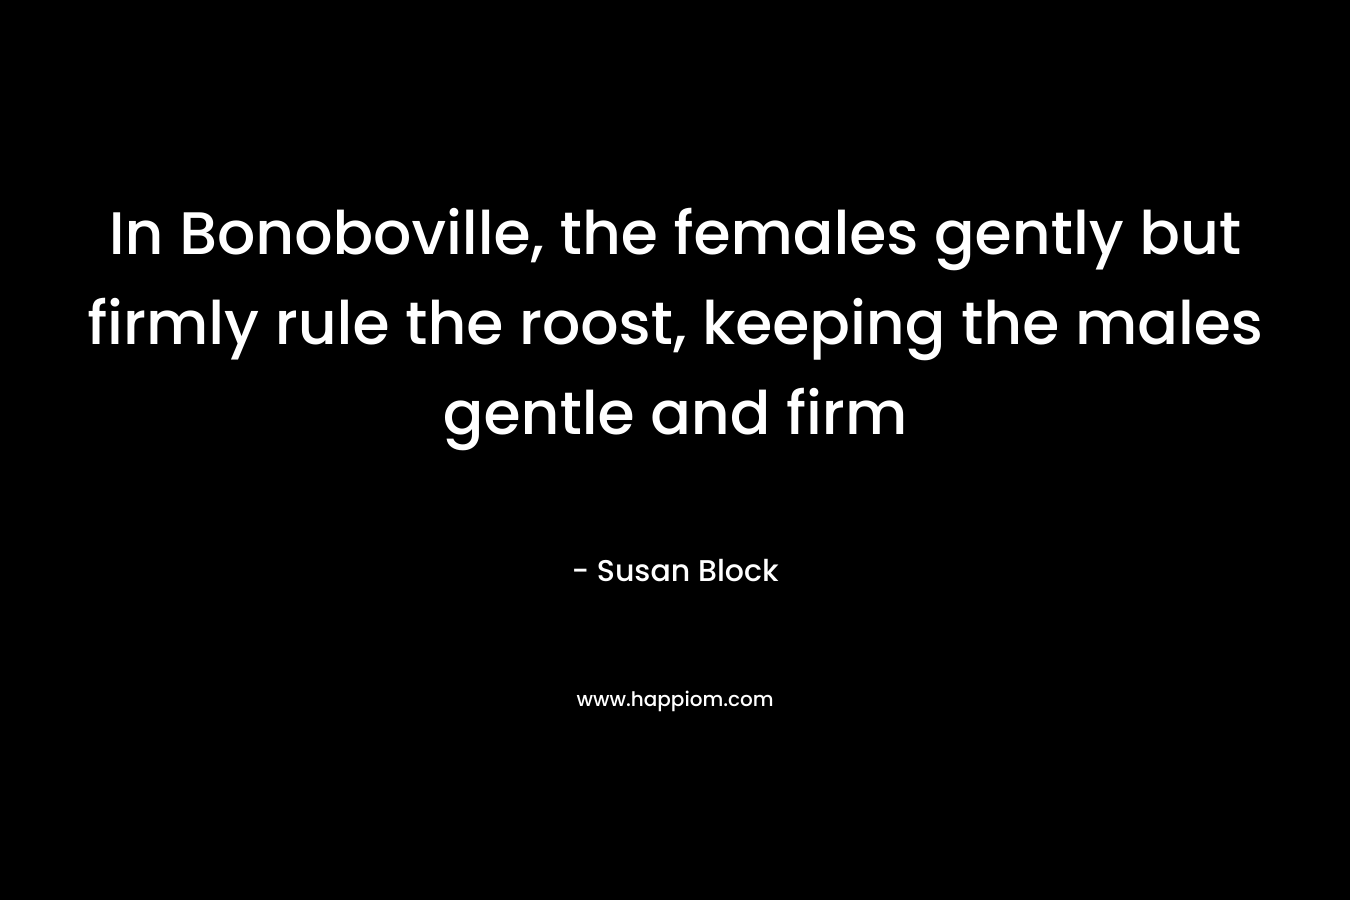 In Bonoboville, the females gently but firmly rule the roost, keeping the males gentle and firm – Susan Block